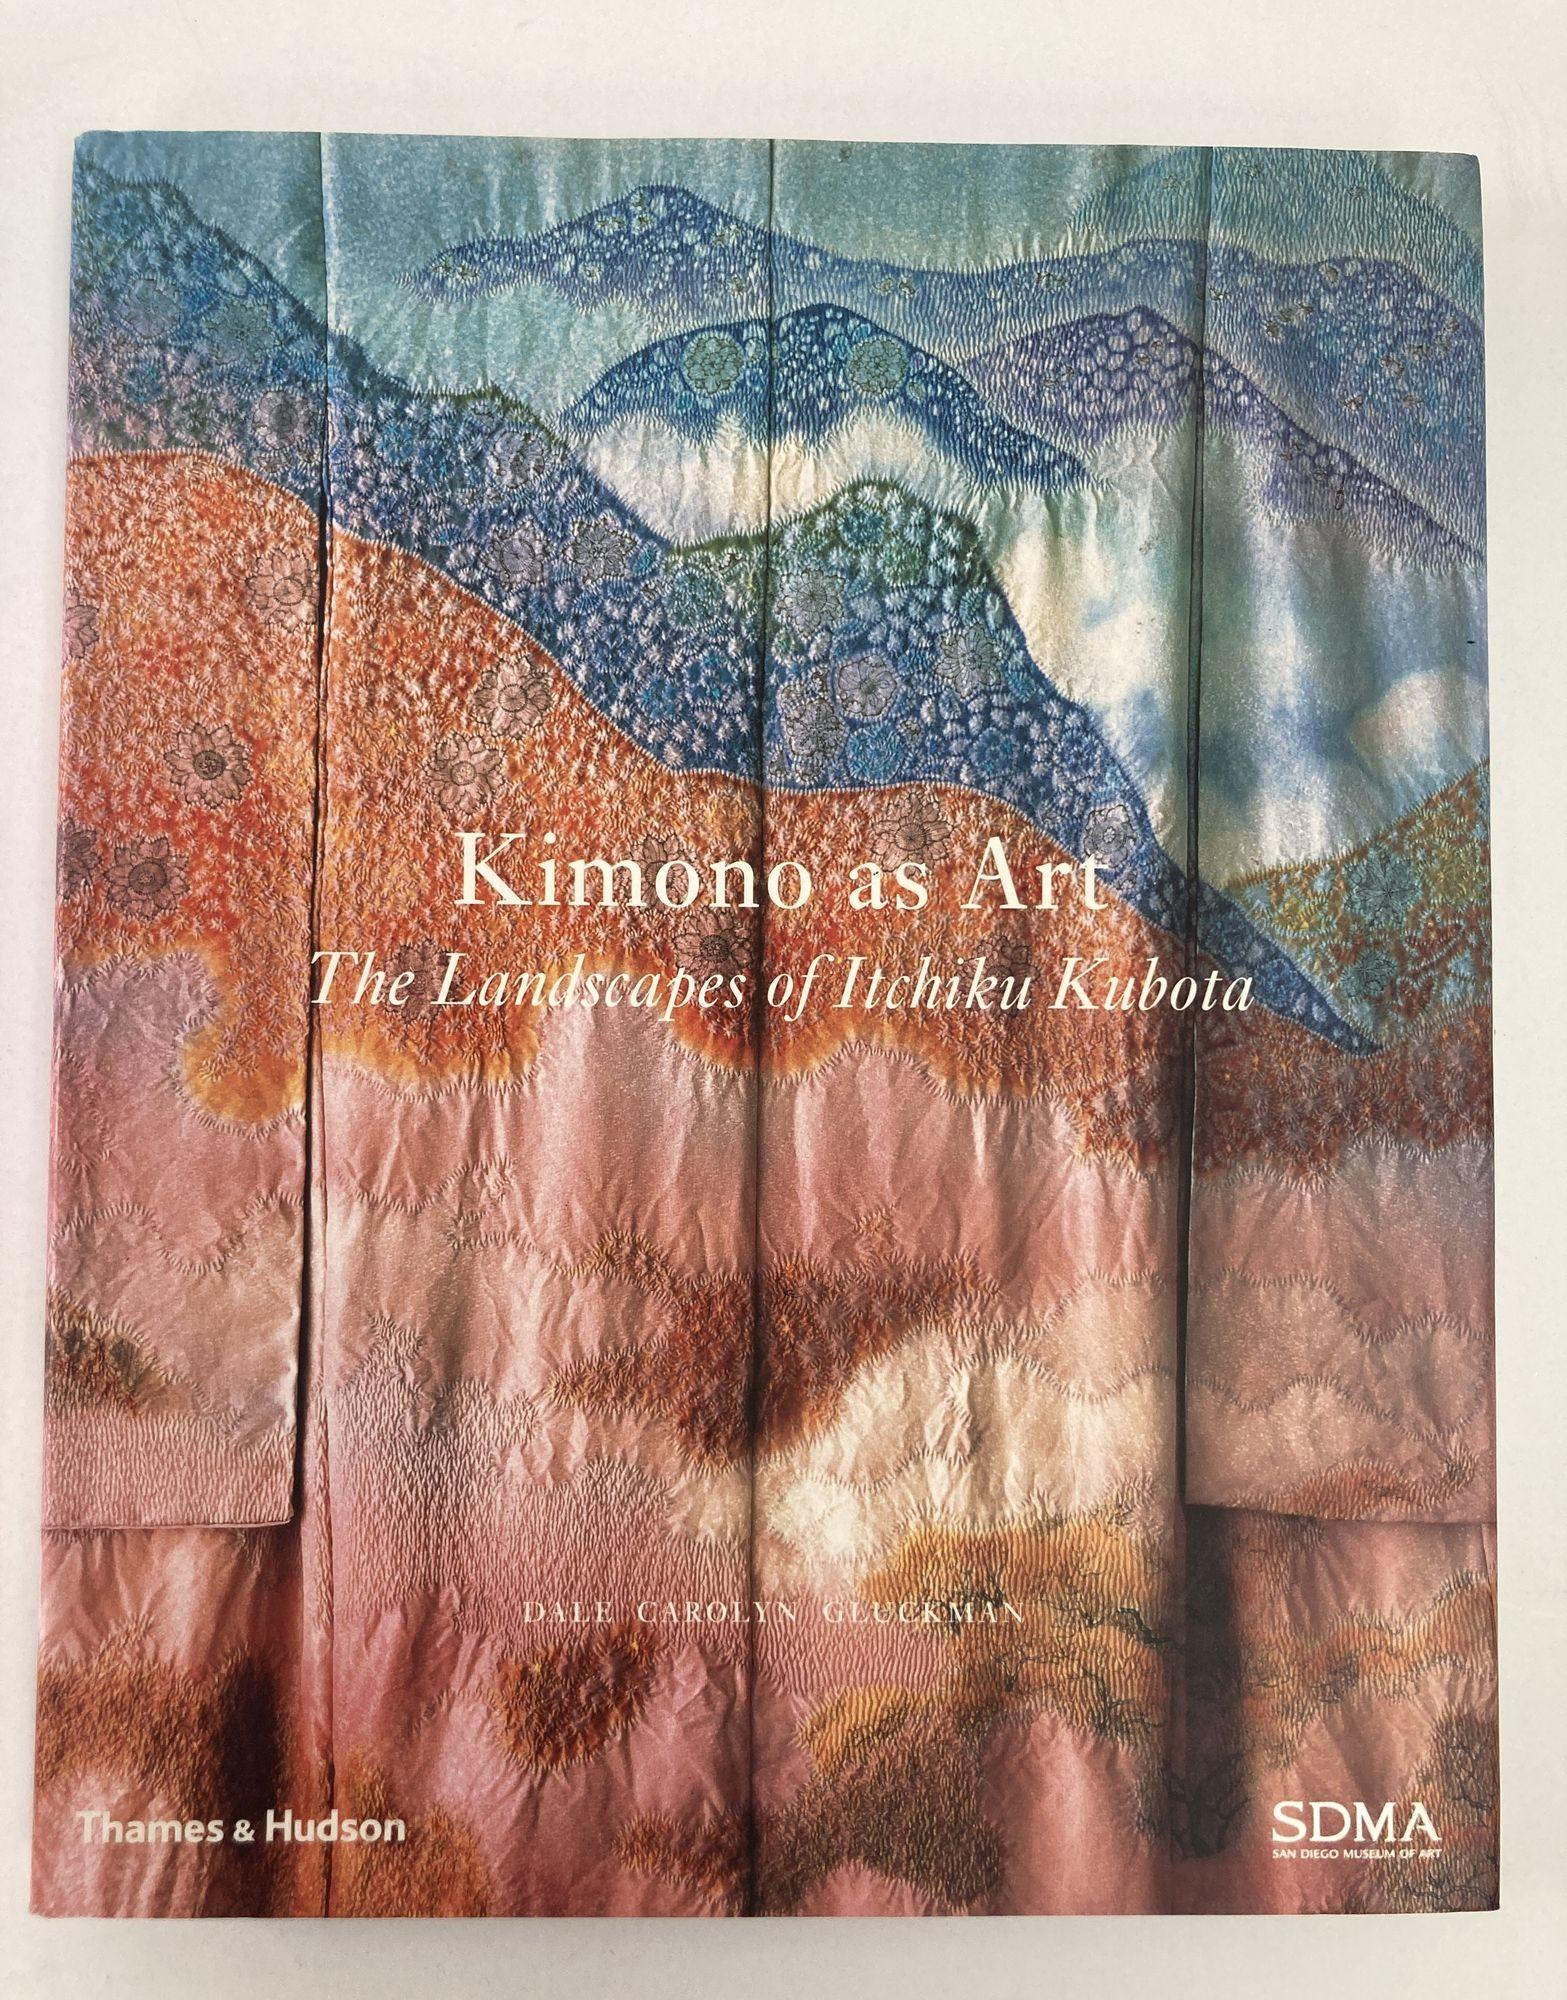 The Landscapes of Itchiku Kubota.
Edited by Dale Carolyn Gluckman, Hollis Goodall.
160 pages, Hardcover book.
First published November 27, 2008
Large beautiful hardcover coffee table book.
This lavishly illustrated book showcases fifty-five